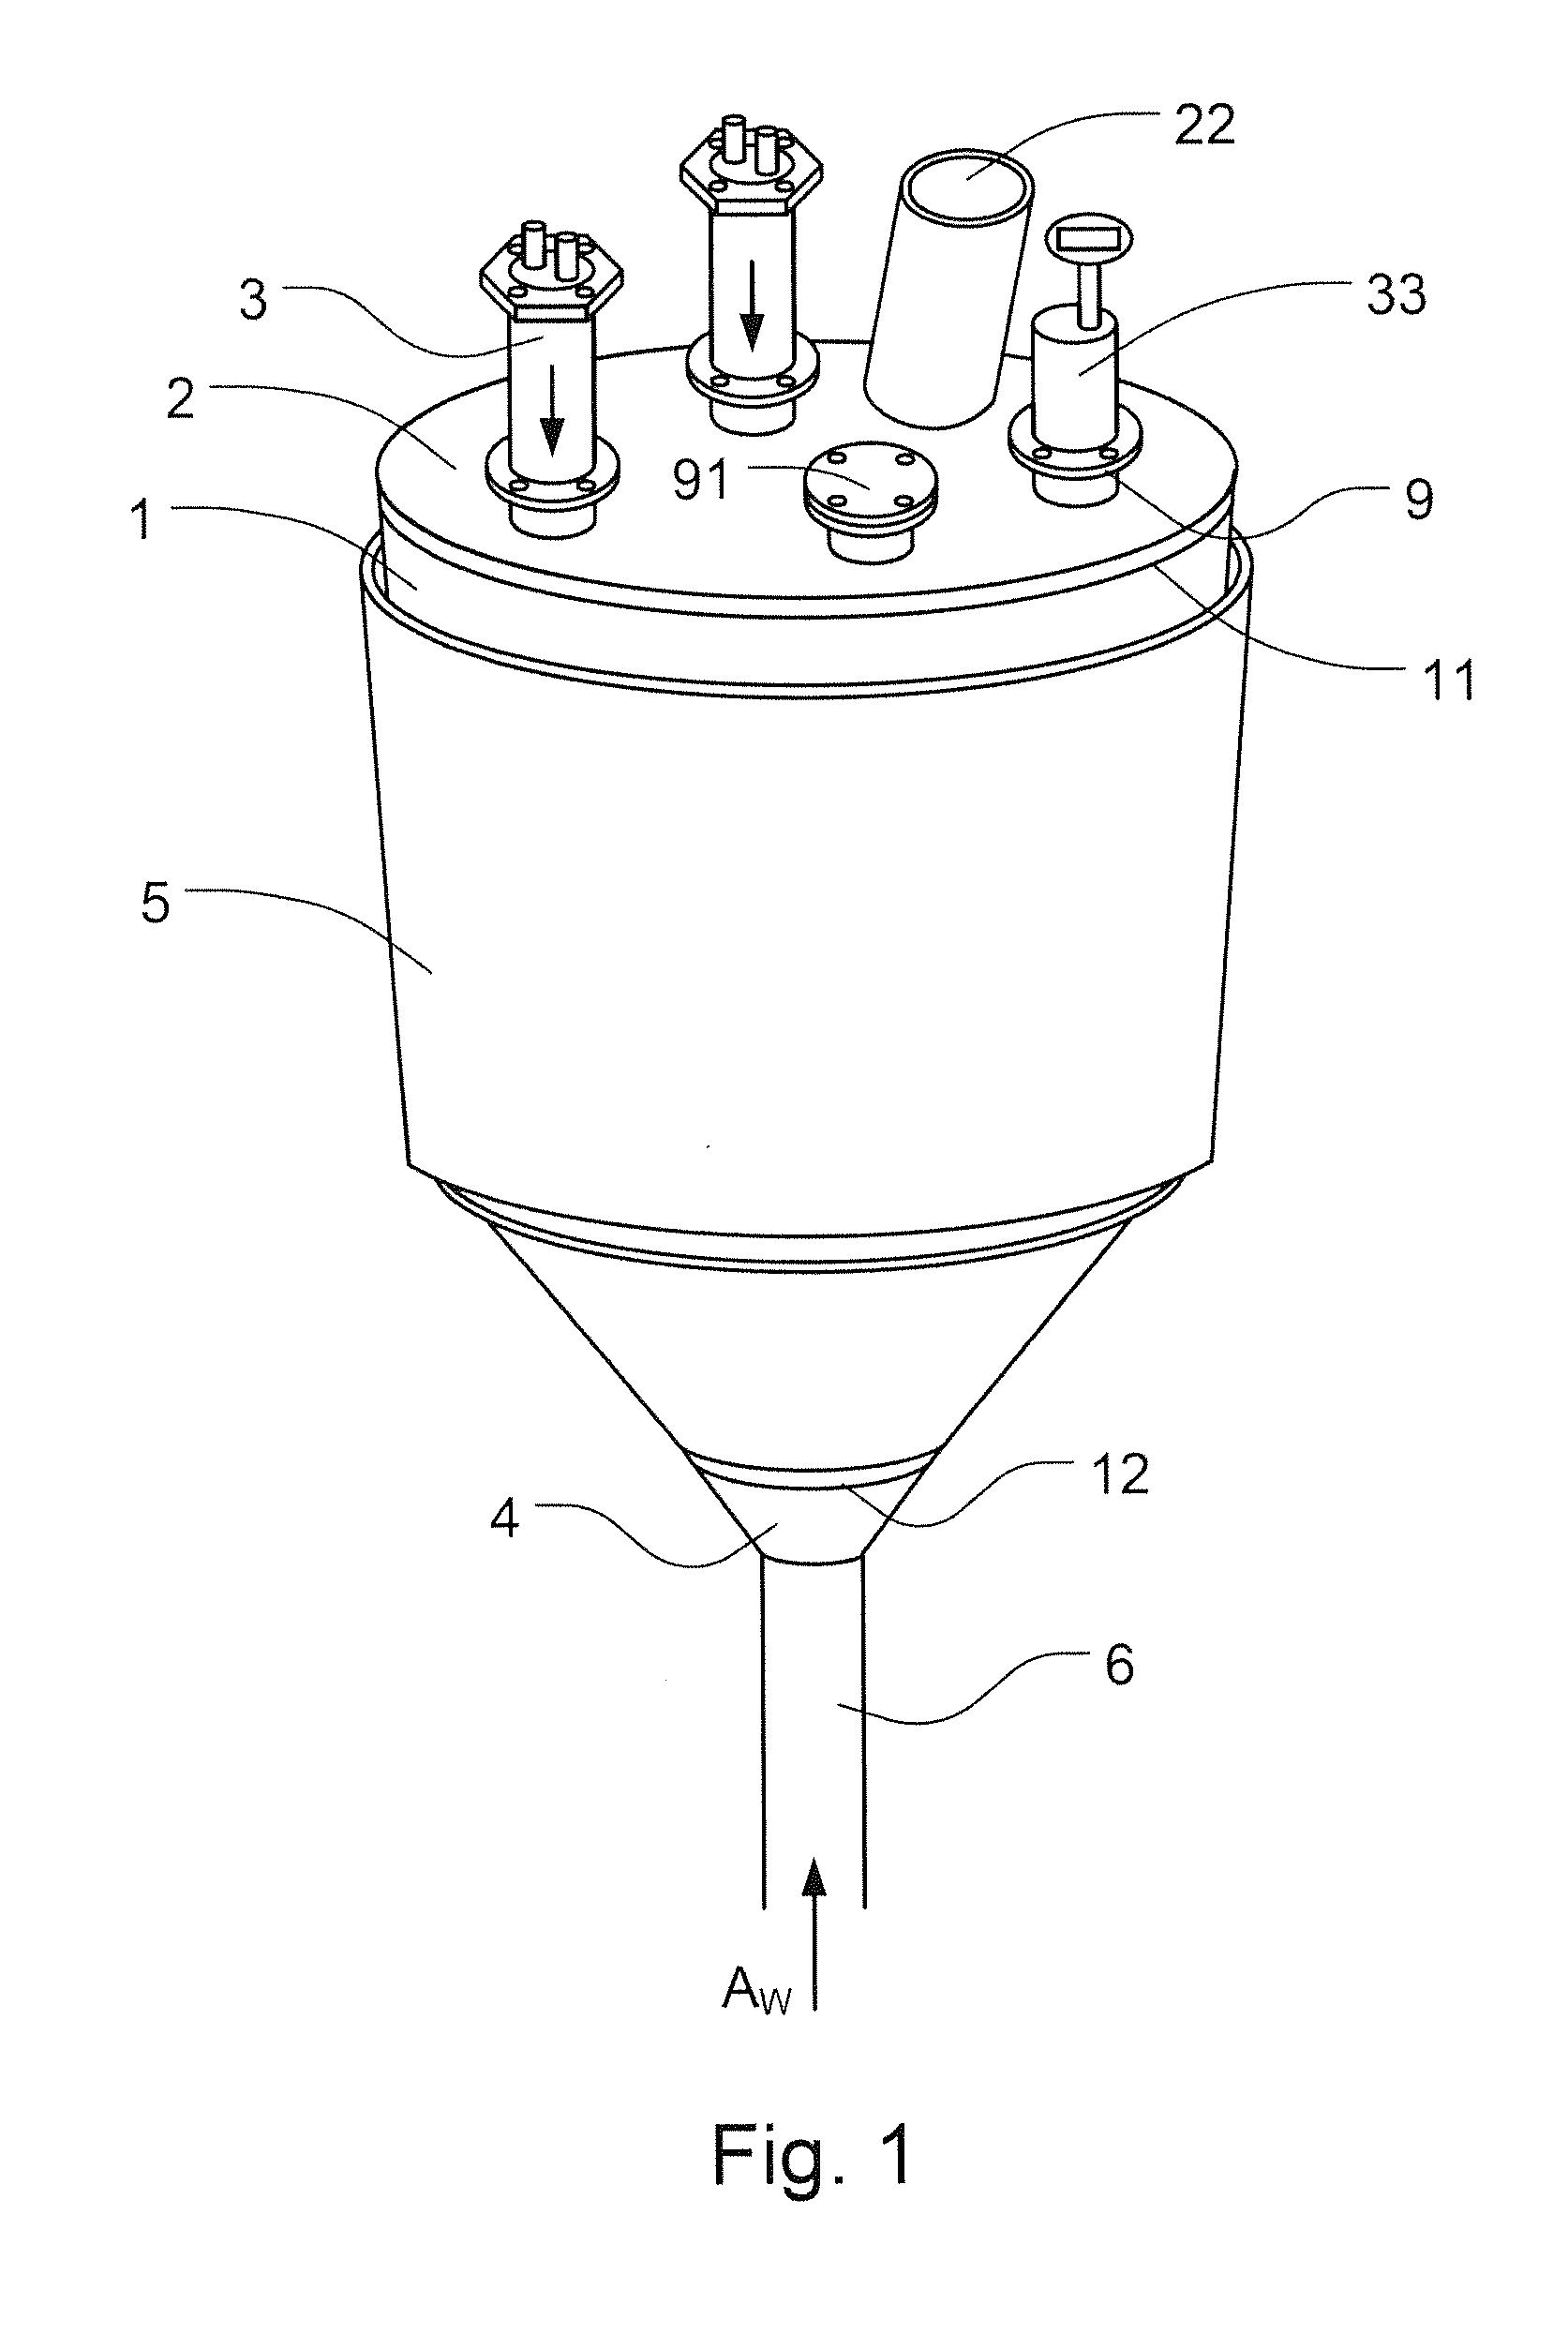 Hybrid heating apparatus applicable to the moving granular bed filter